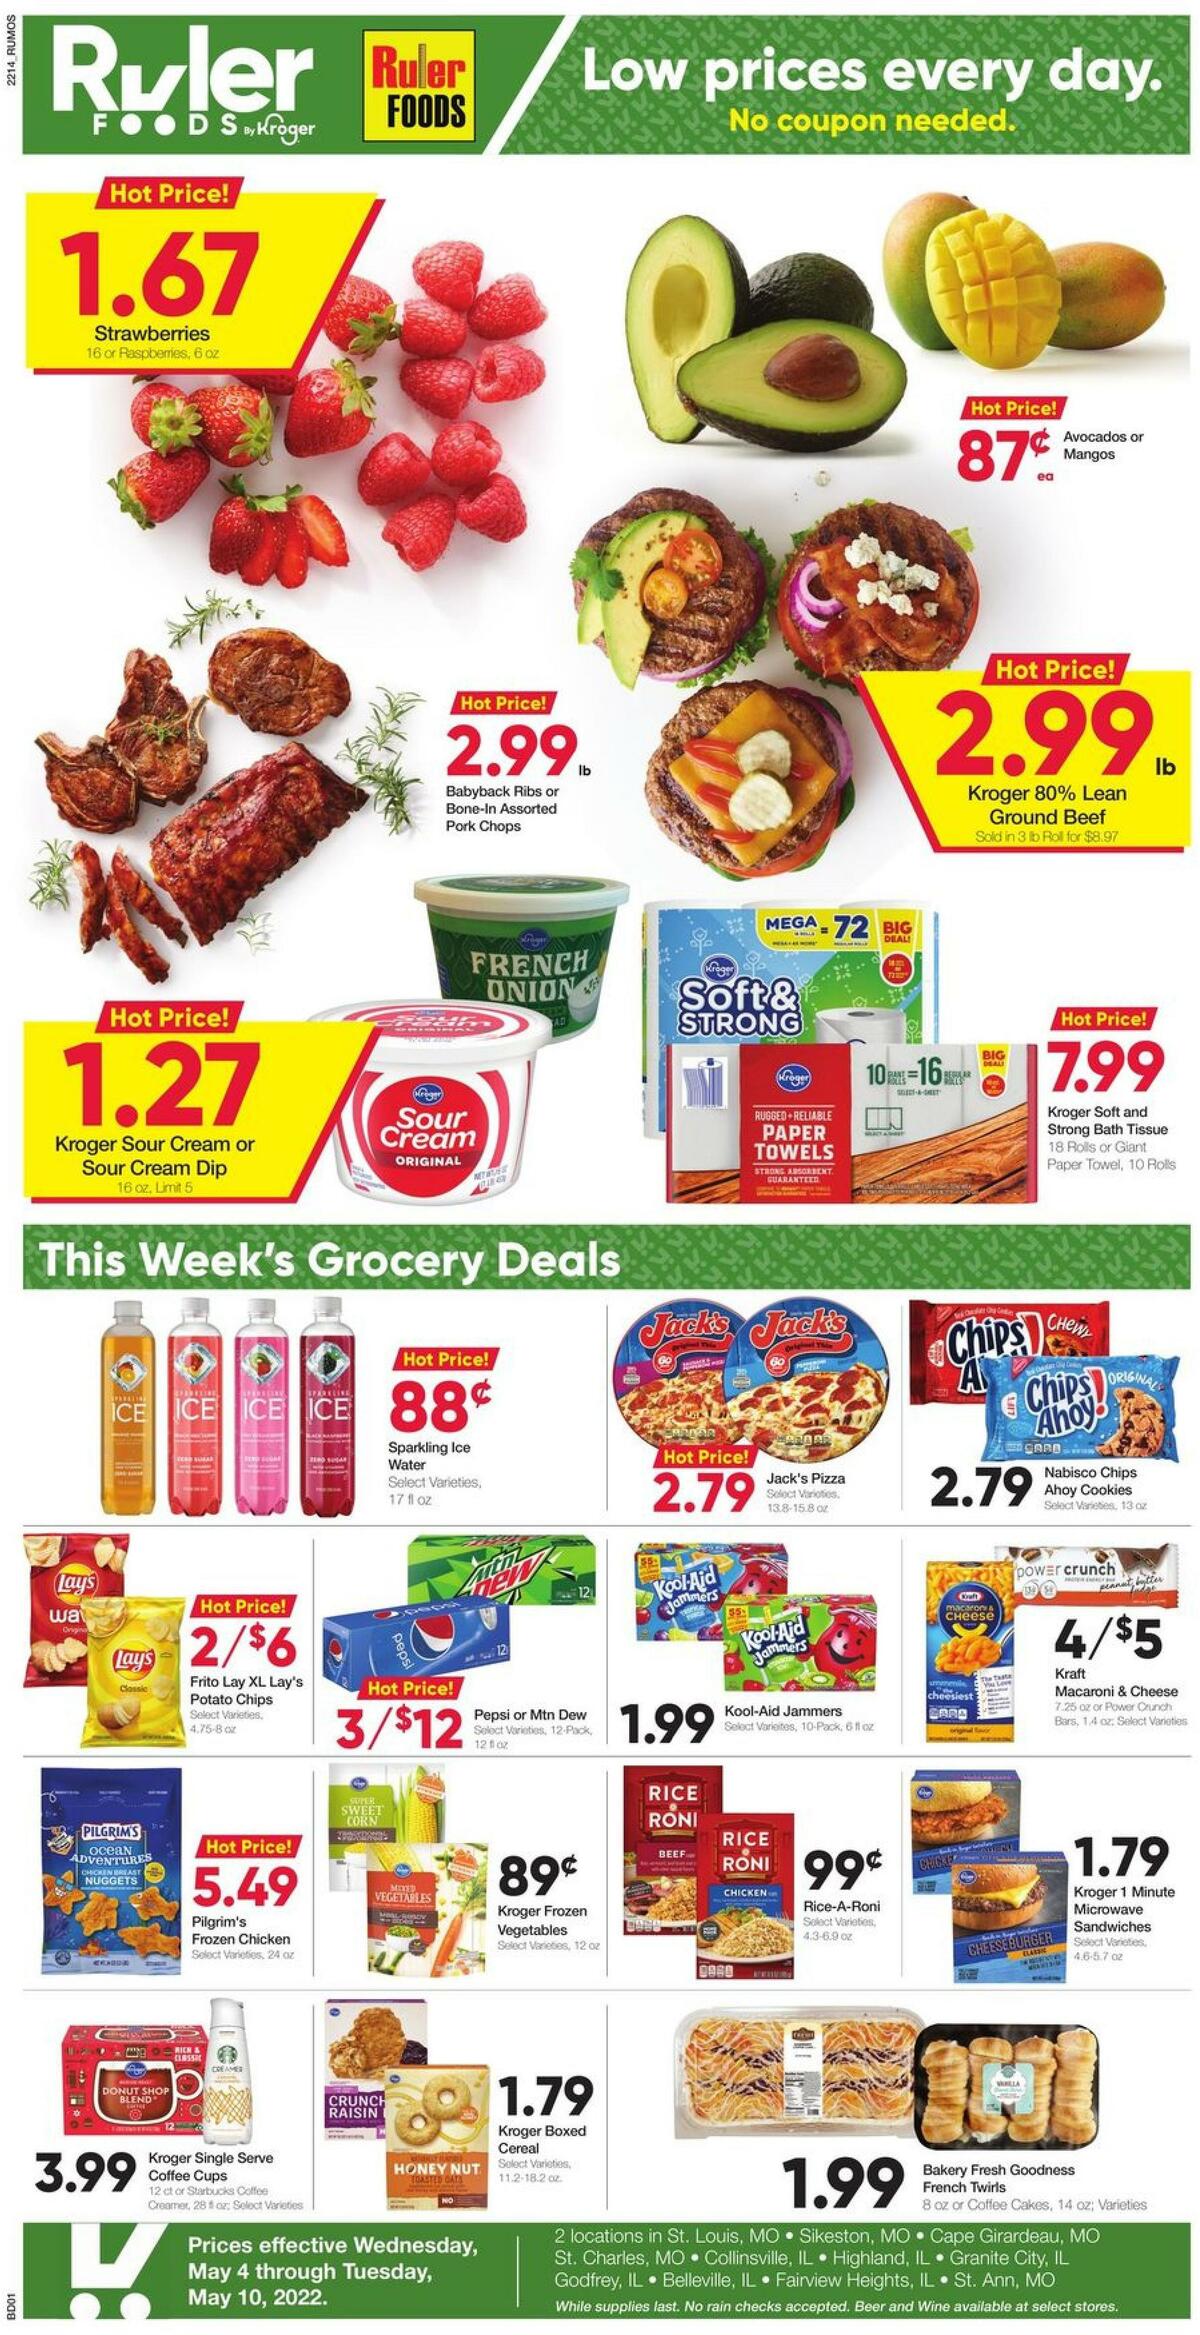 Ruler Foods Weekly Ad from May 4